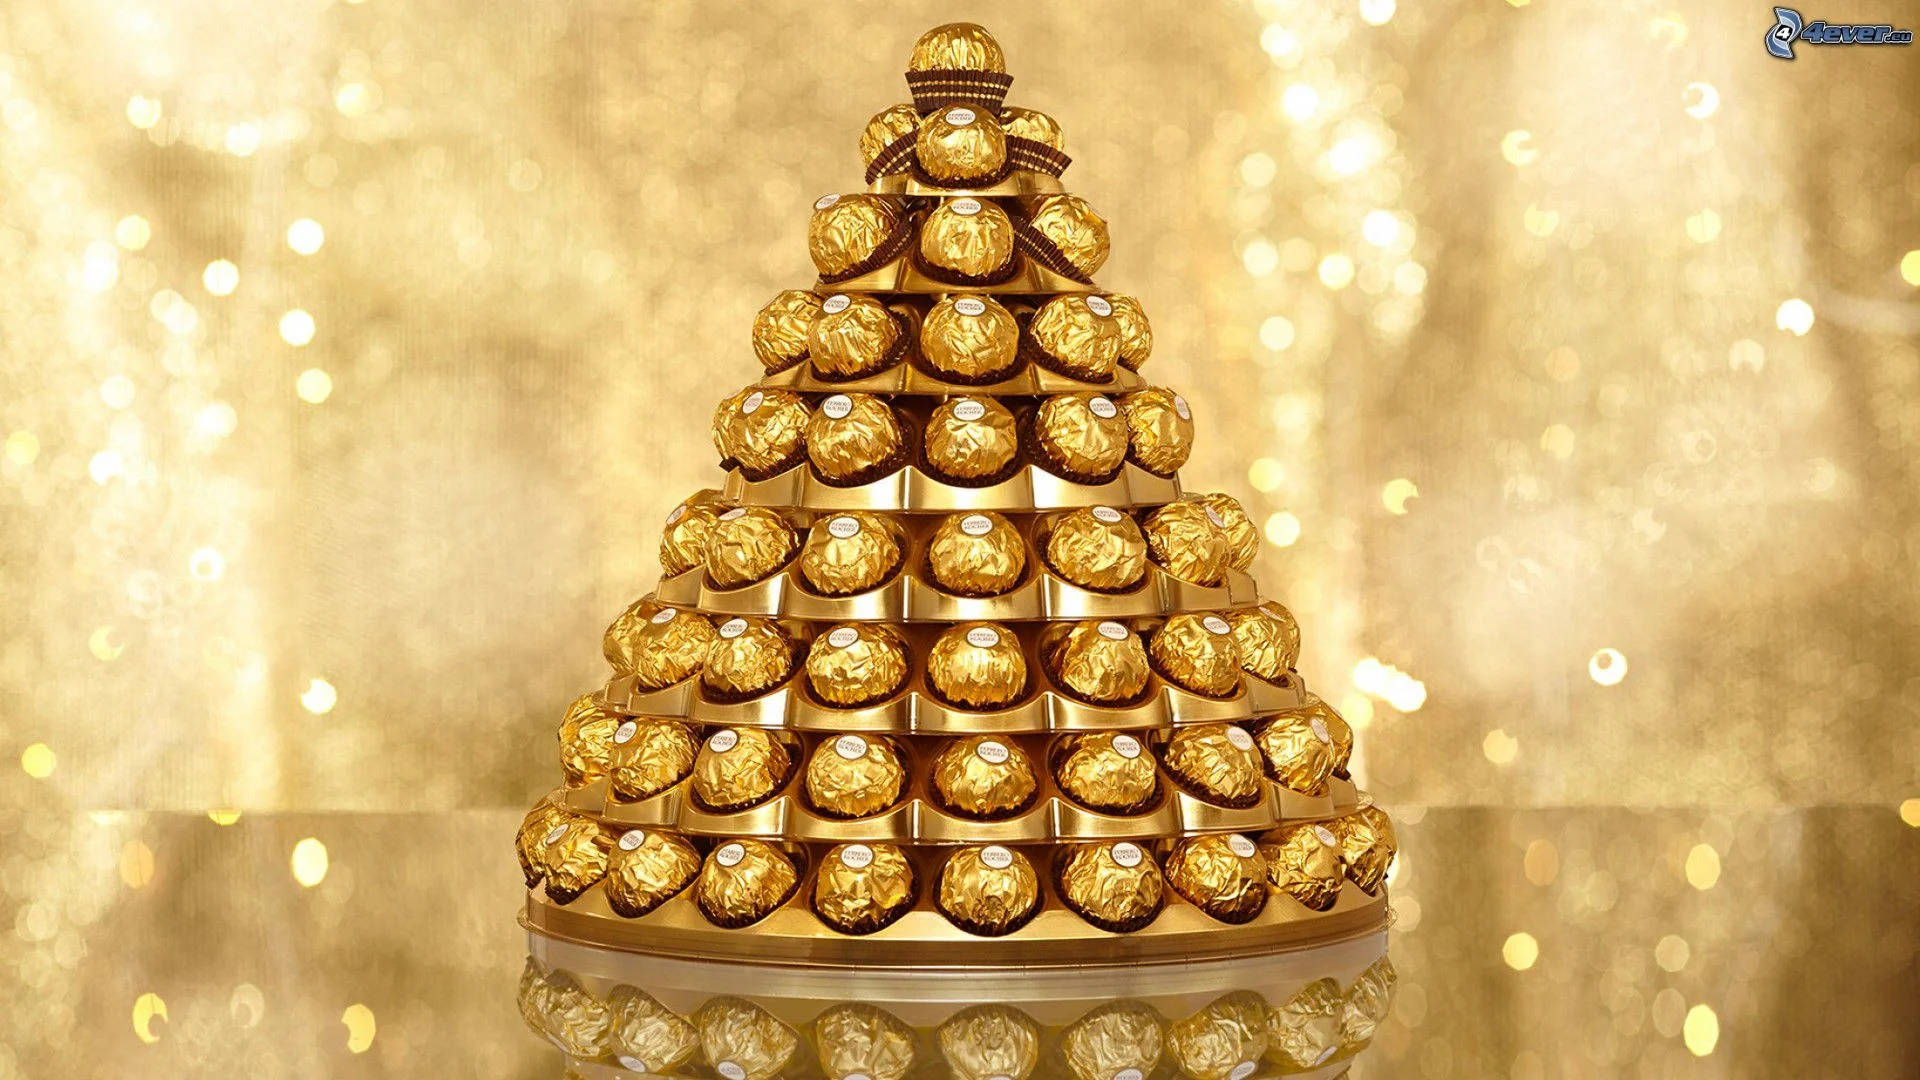 Elegant Pyramid Of Ferrero Rocher Chocolates Wrapped In Gold Foil Background